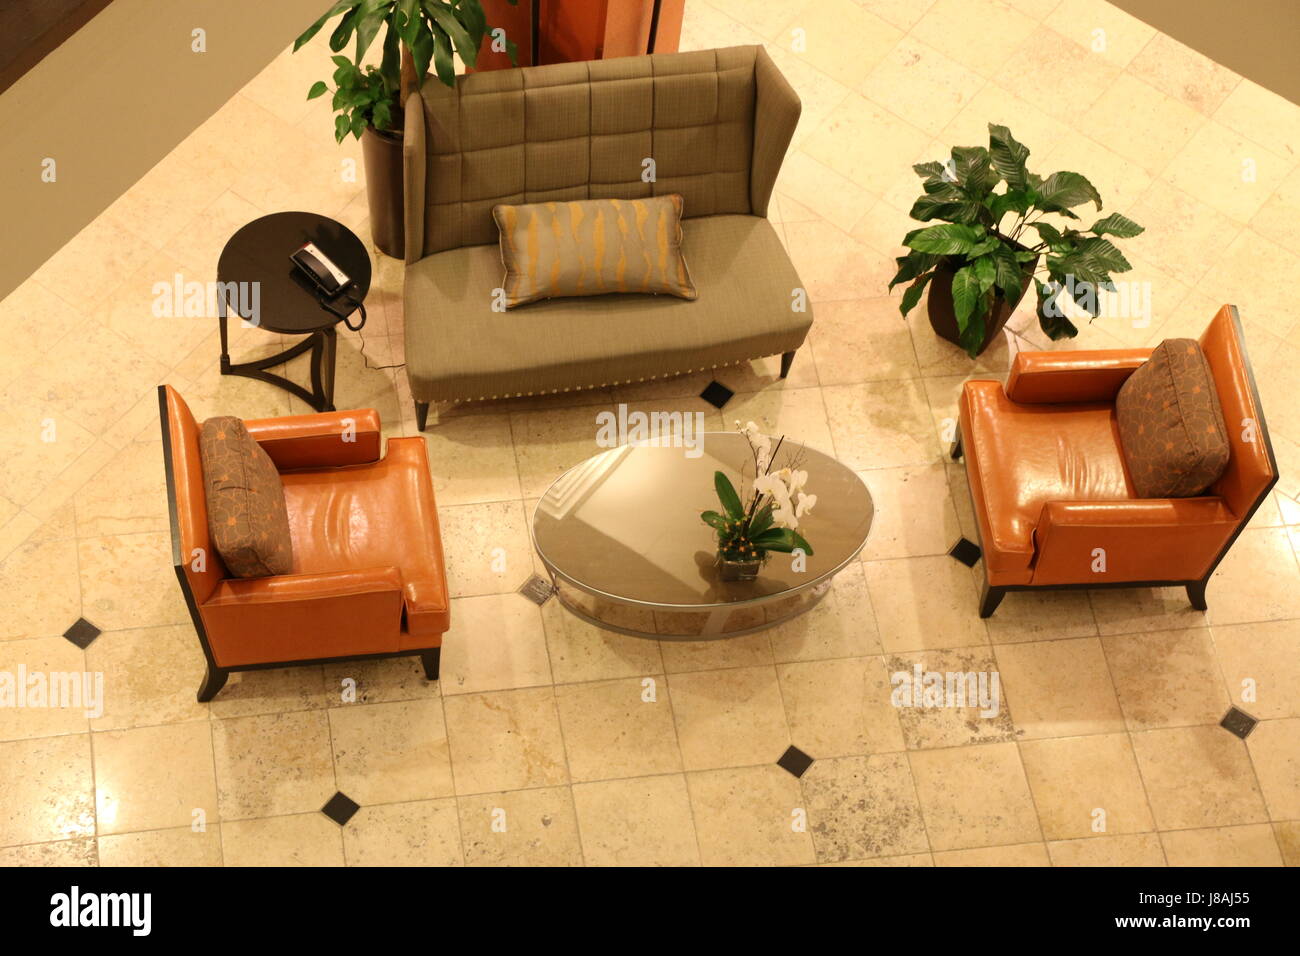 Groupings Of Leather Chairs Hotel Lobby Stock Photo 142833969